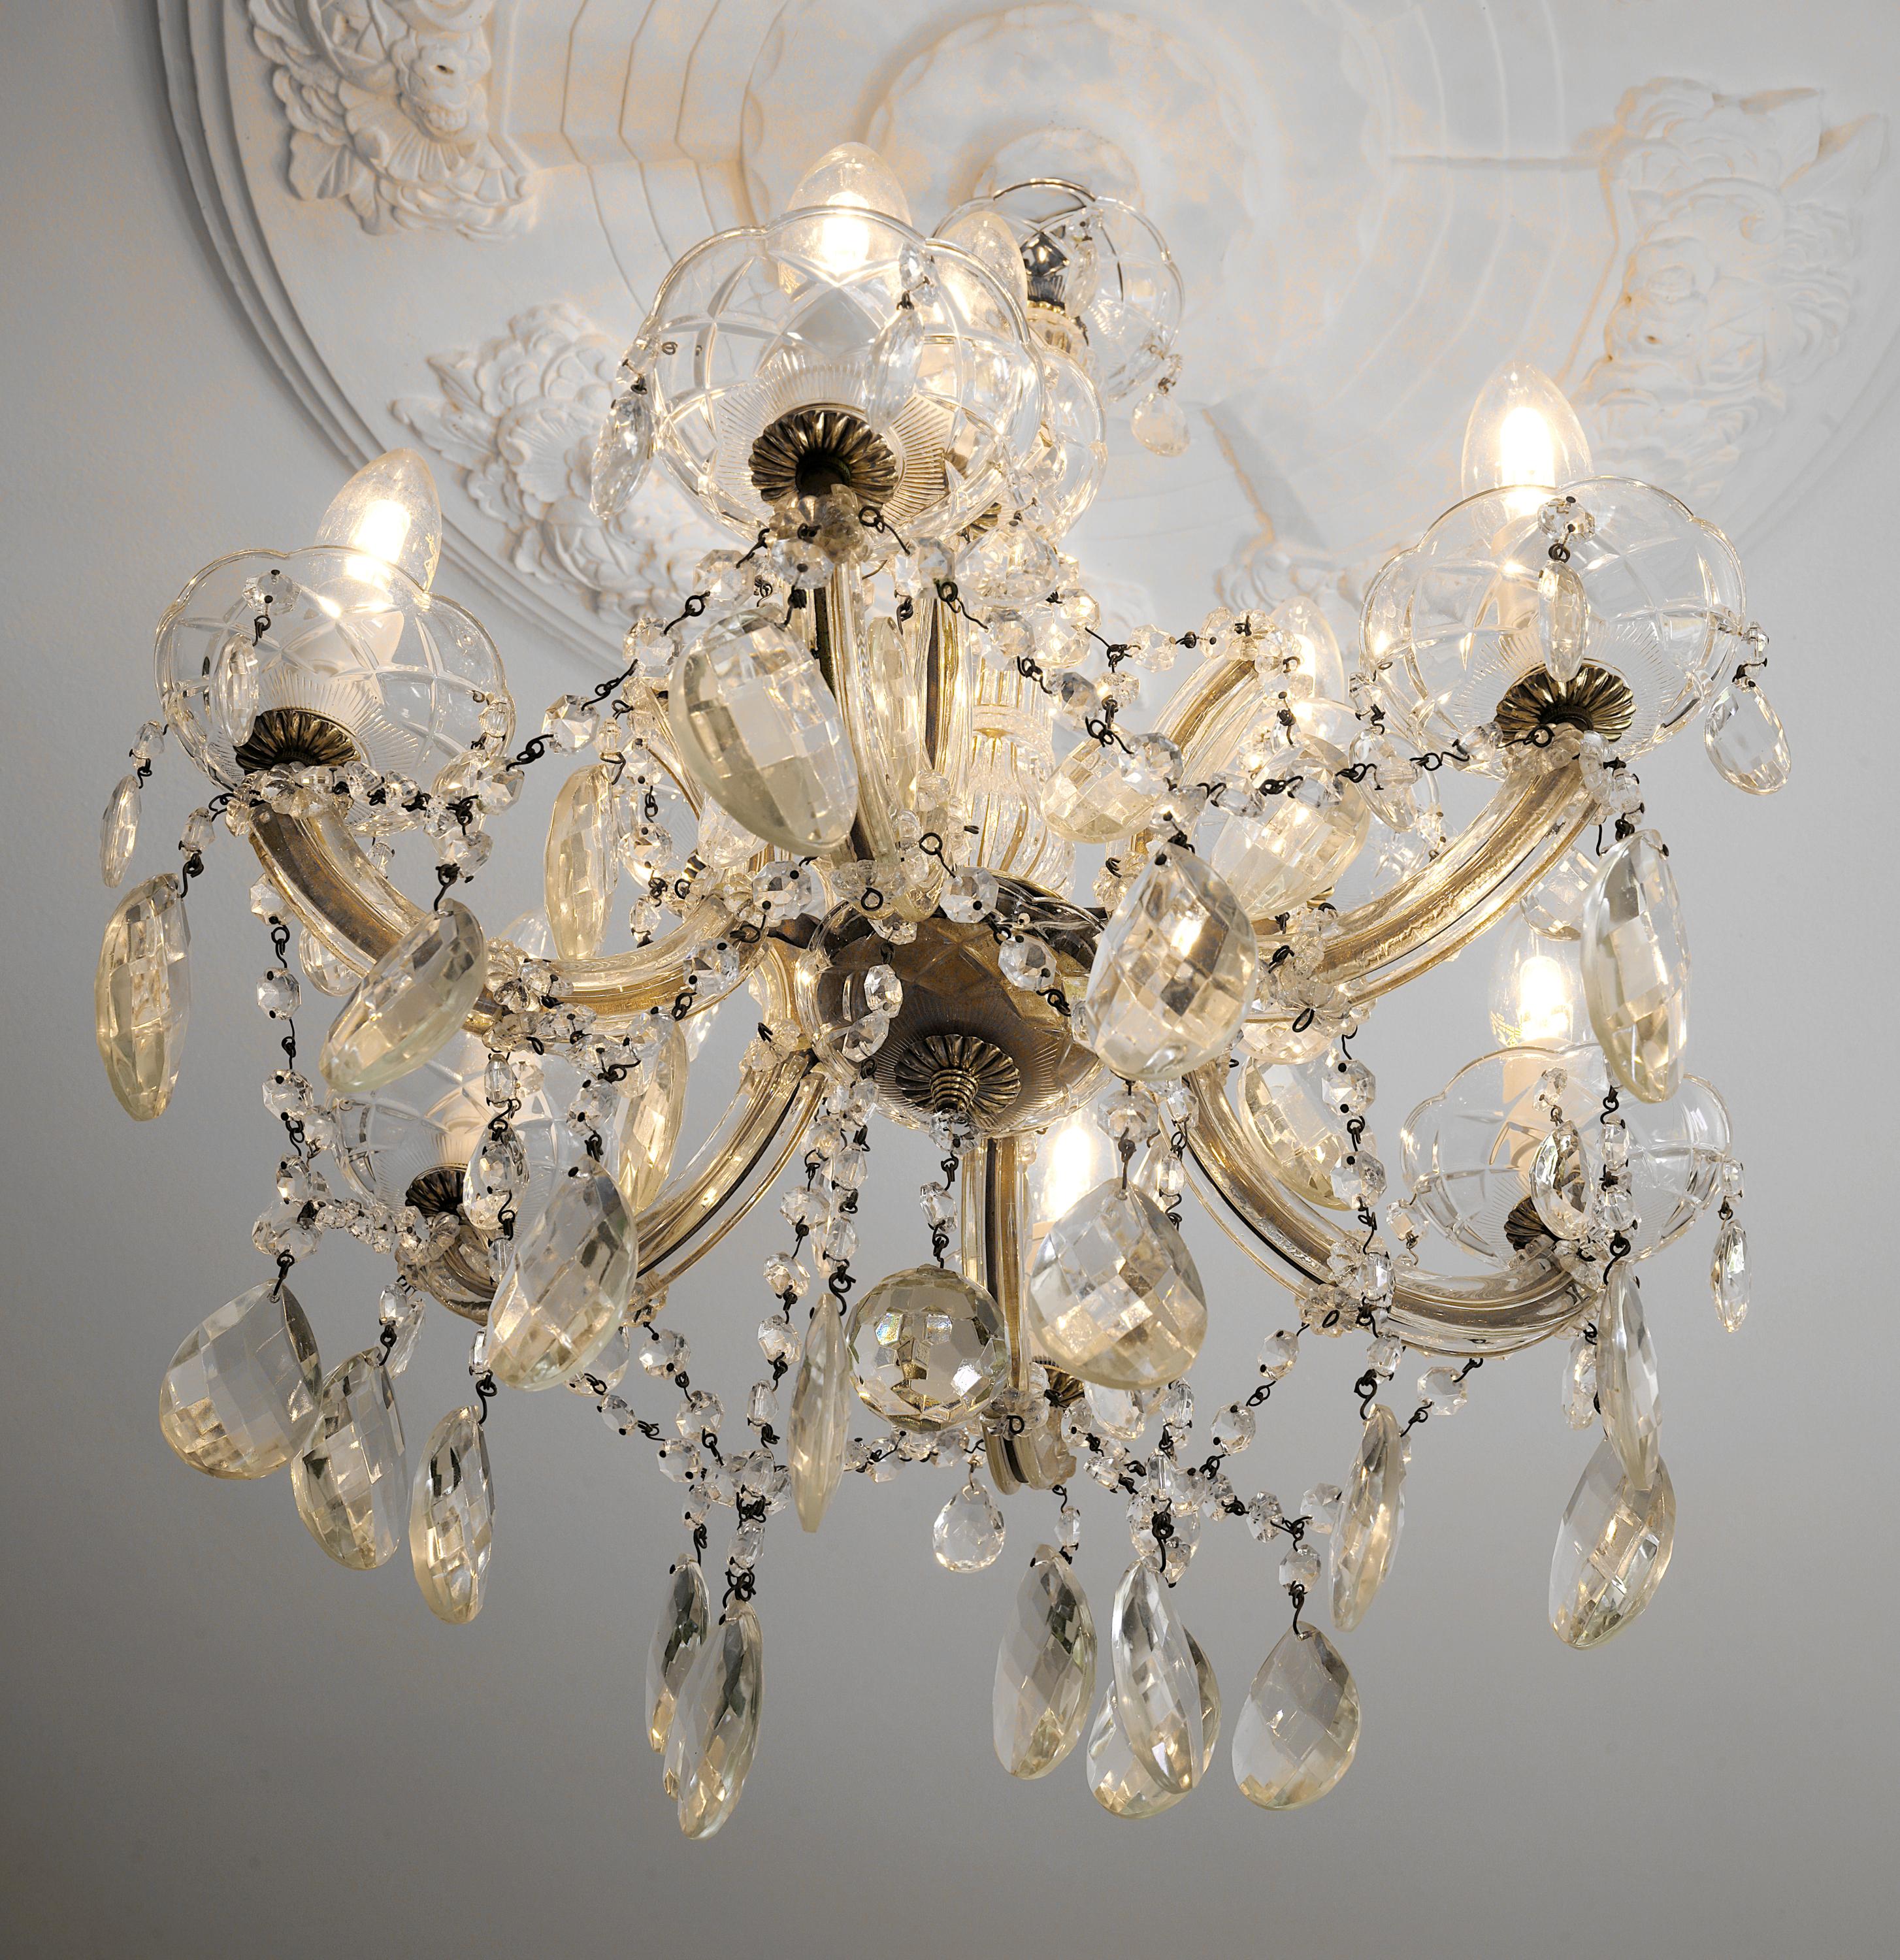 Metal French Chandelier with Tassels, 1950s For Sale